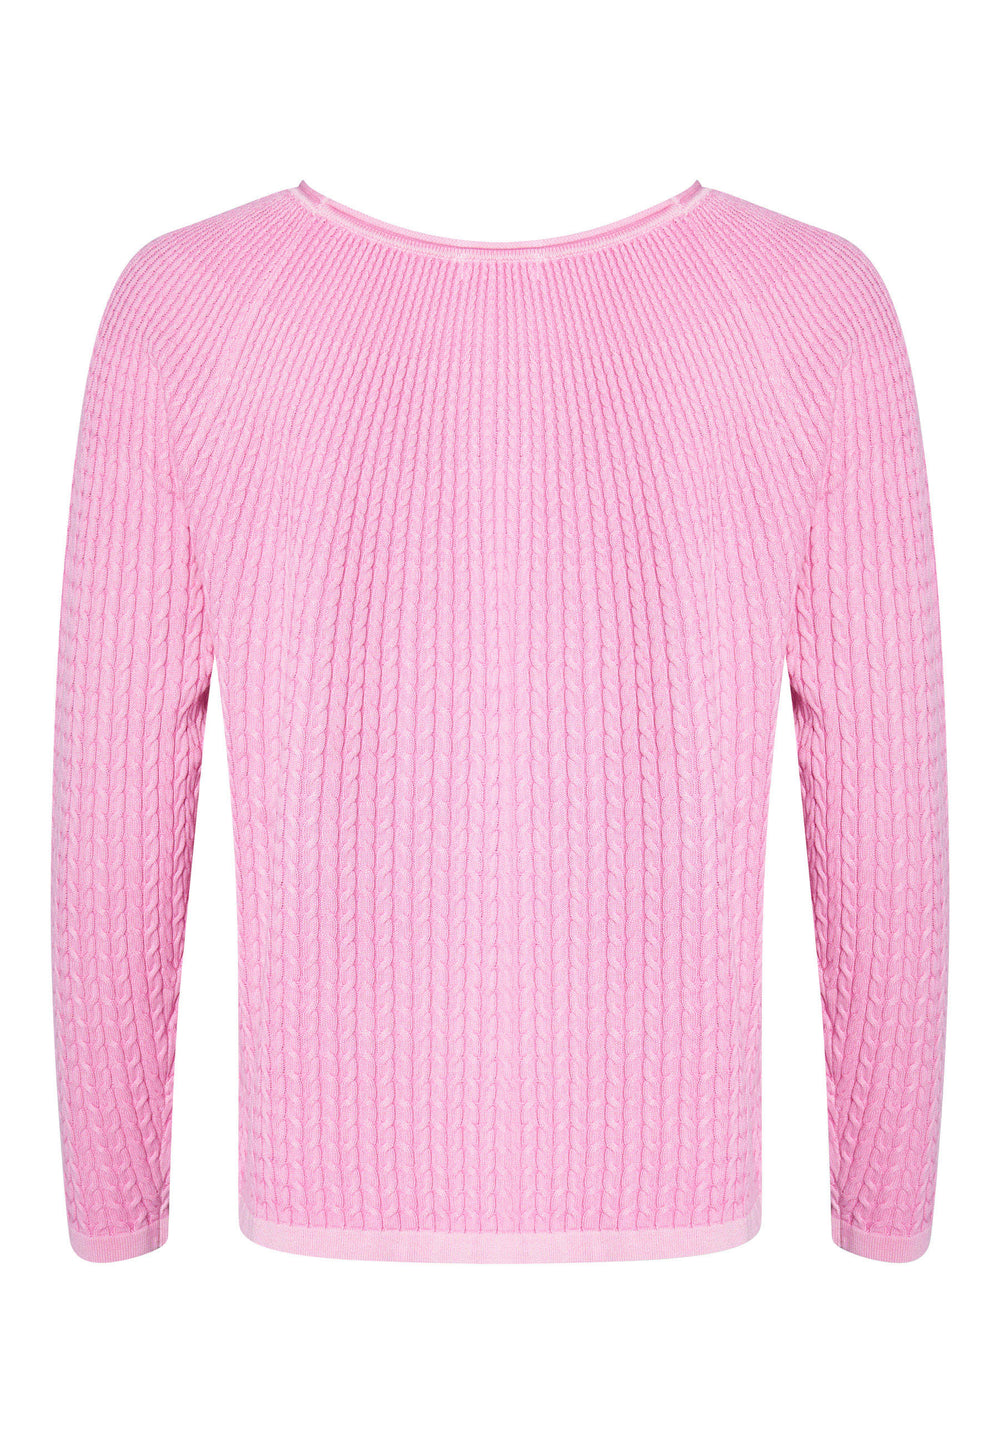 Lind LiAgnes Knit Pullover 6200 Bubbelgum Pink